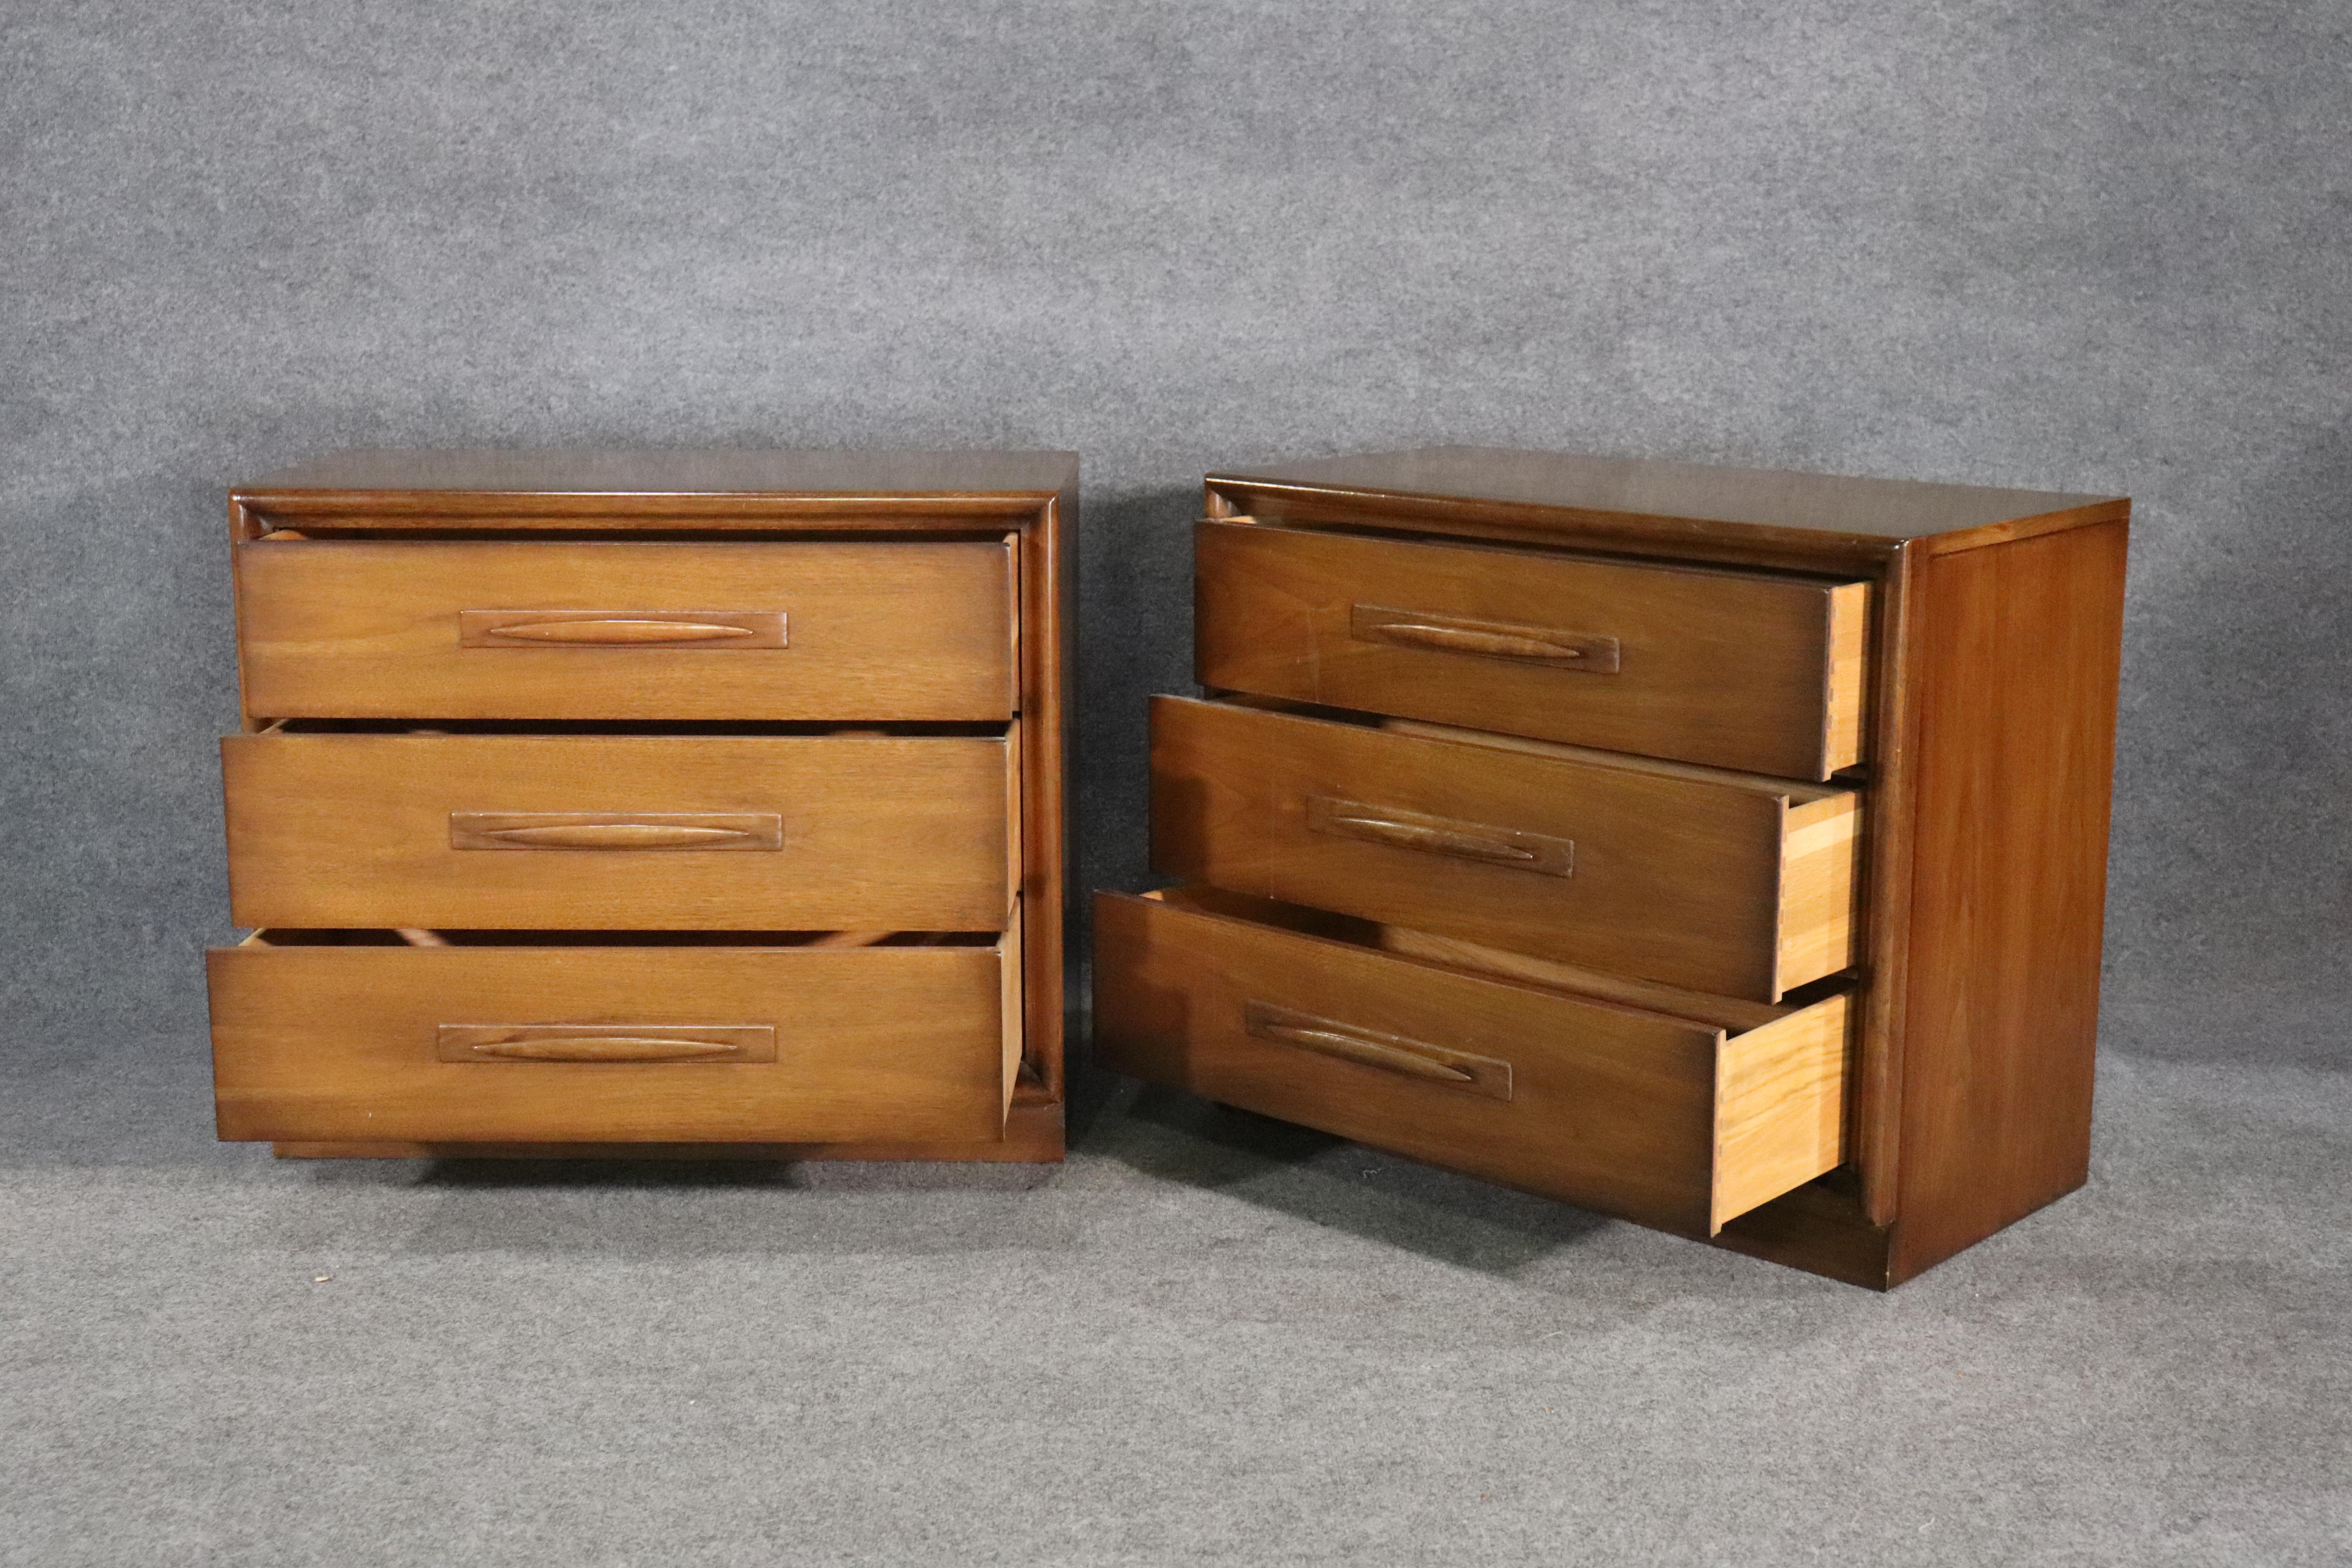 Pair of mid-century modern chest of drawers in walnut. Sculpted wood handles on each drawer. Could be used as large bedside tables.
Please confirm location NY or NJ